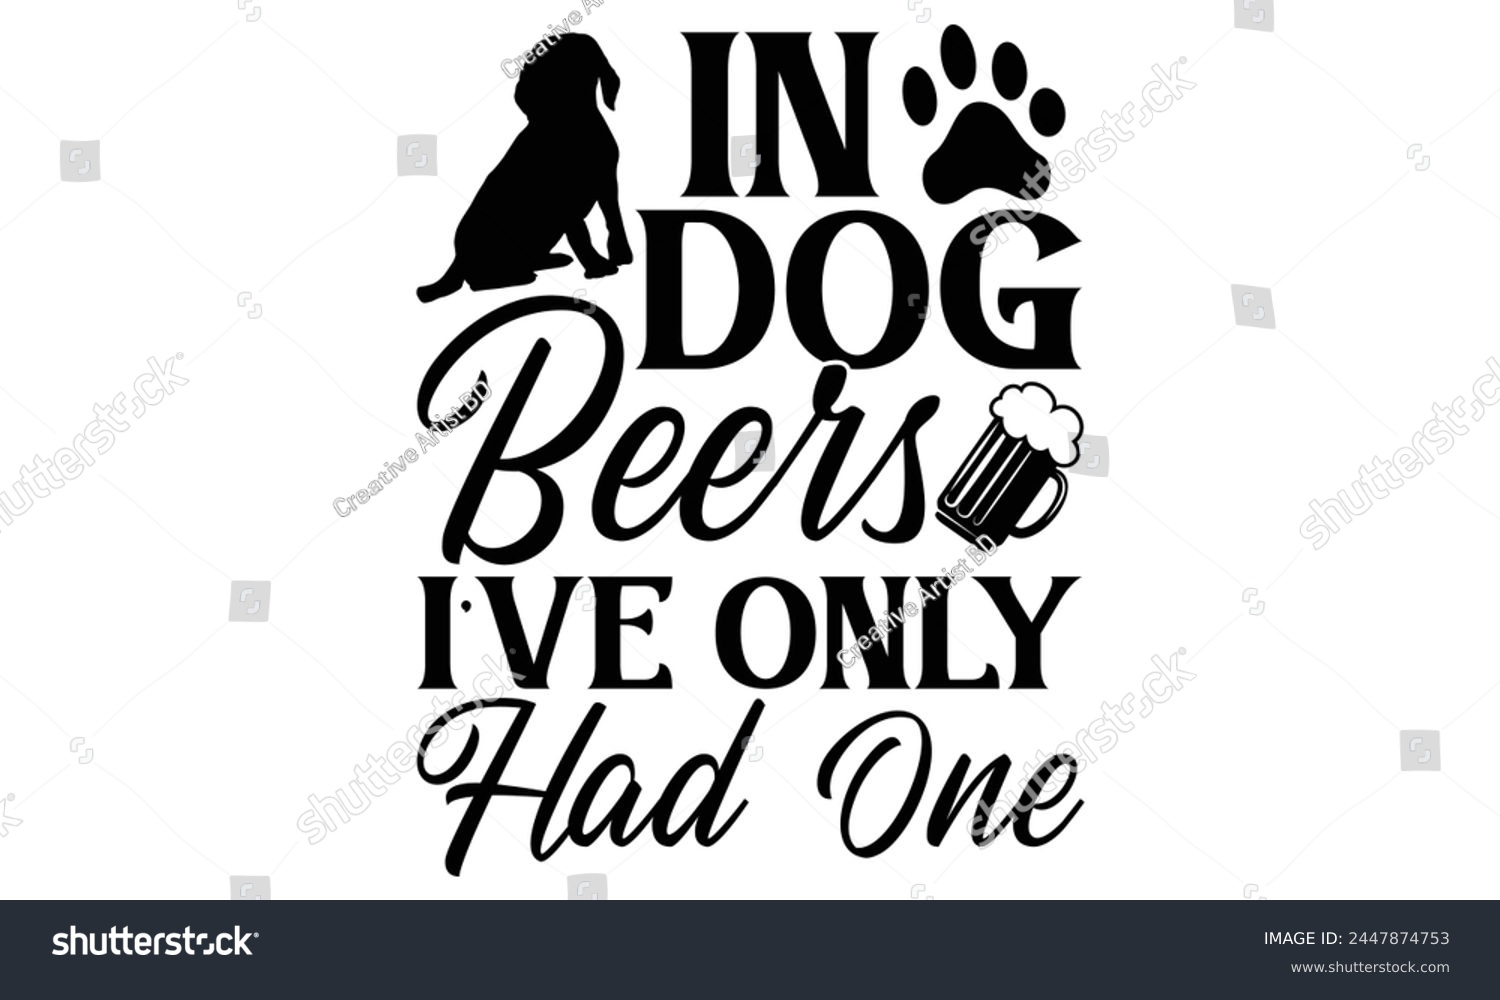 SVG of In Dog Beers I’ve Only Had One  - Dog T Shirt Design, Hand drawn lettering phrase isolated on white background, For the design of postcards, banner, flyer and mug. svg